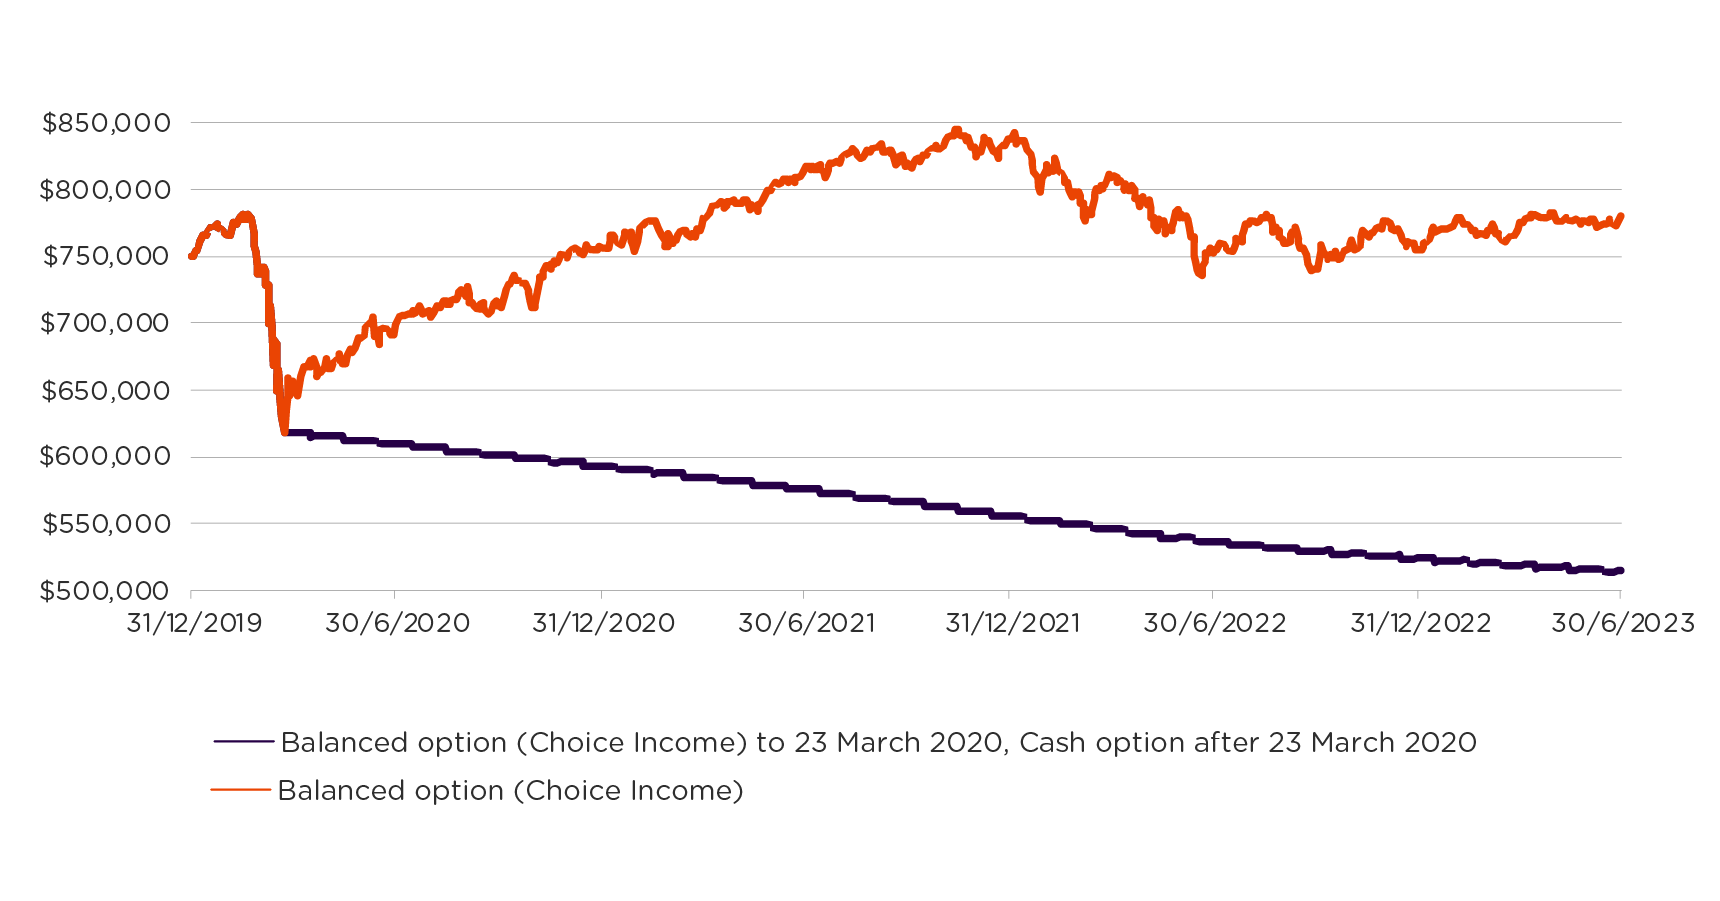 A line graph showing the difference in performance between the Balanced and Cash options from 31/12/2019 to 30/06/2023 with a starting Balance of $750,000 in Choice Income.